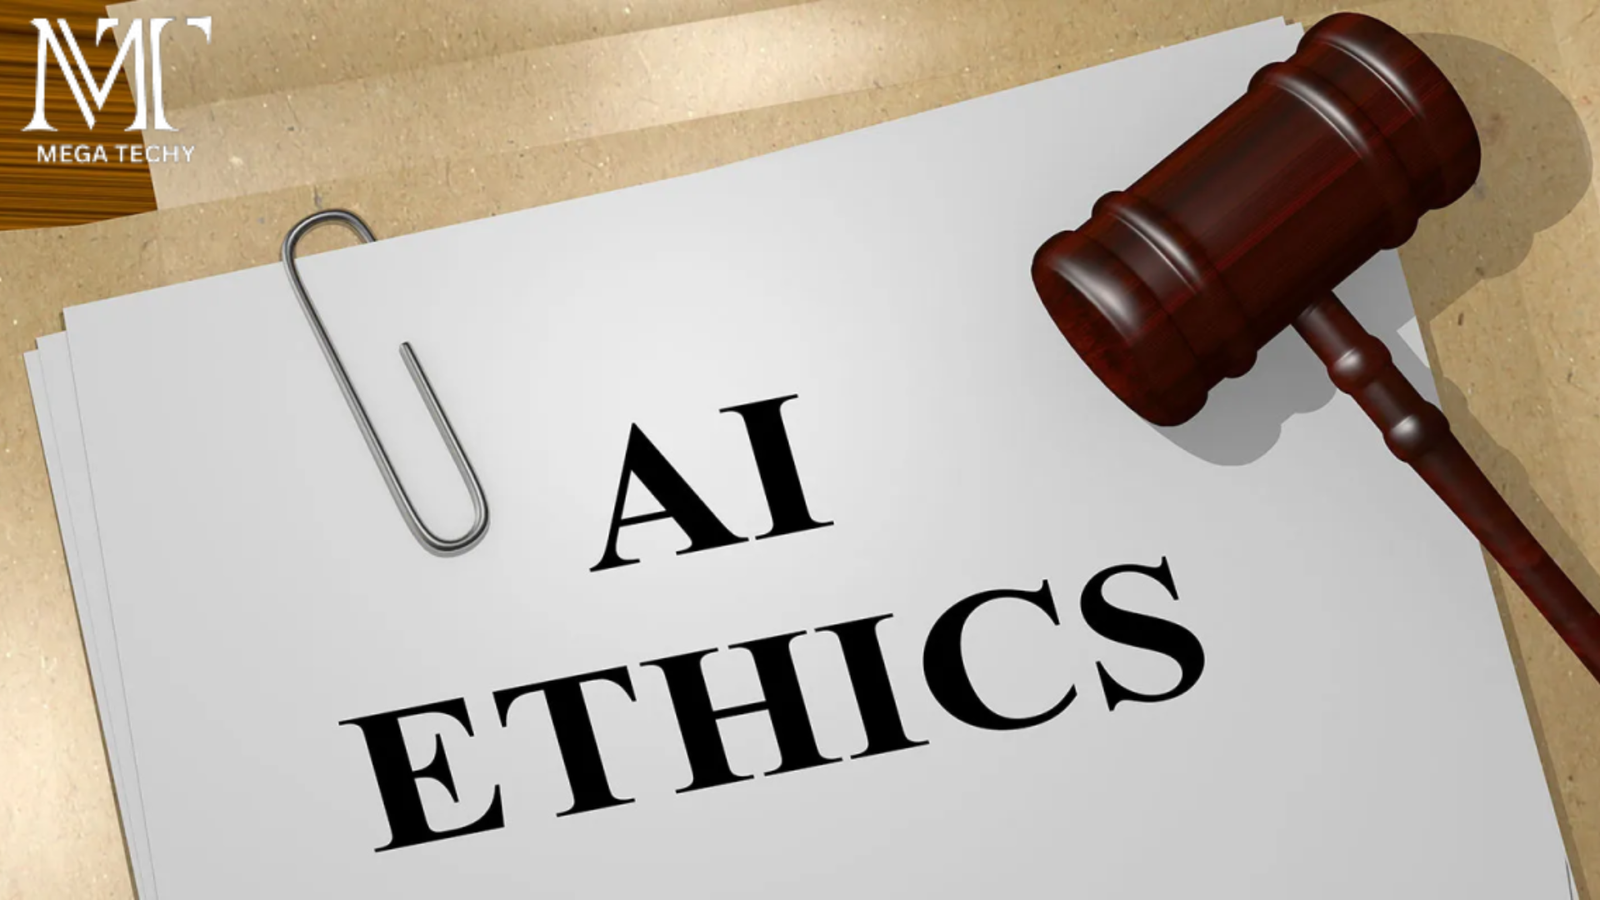 “The Ethics of AI: What You Need to Know About Artificial Intelligence”